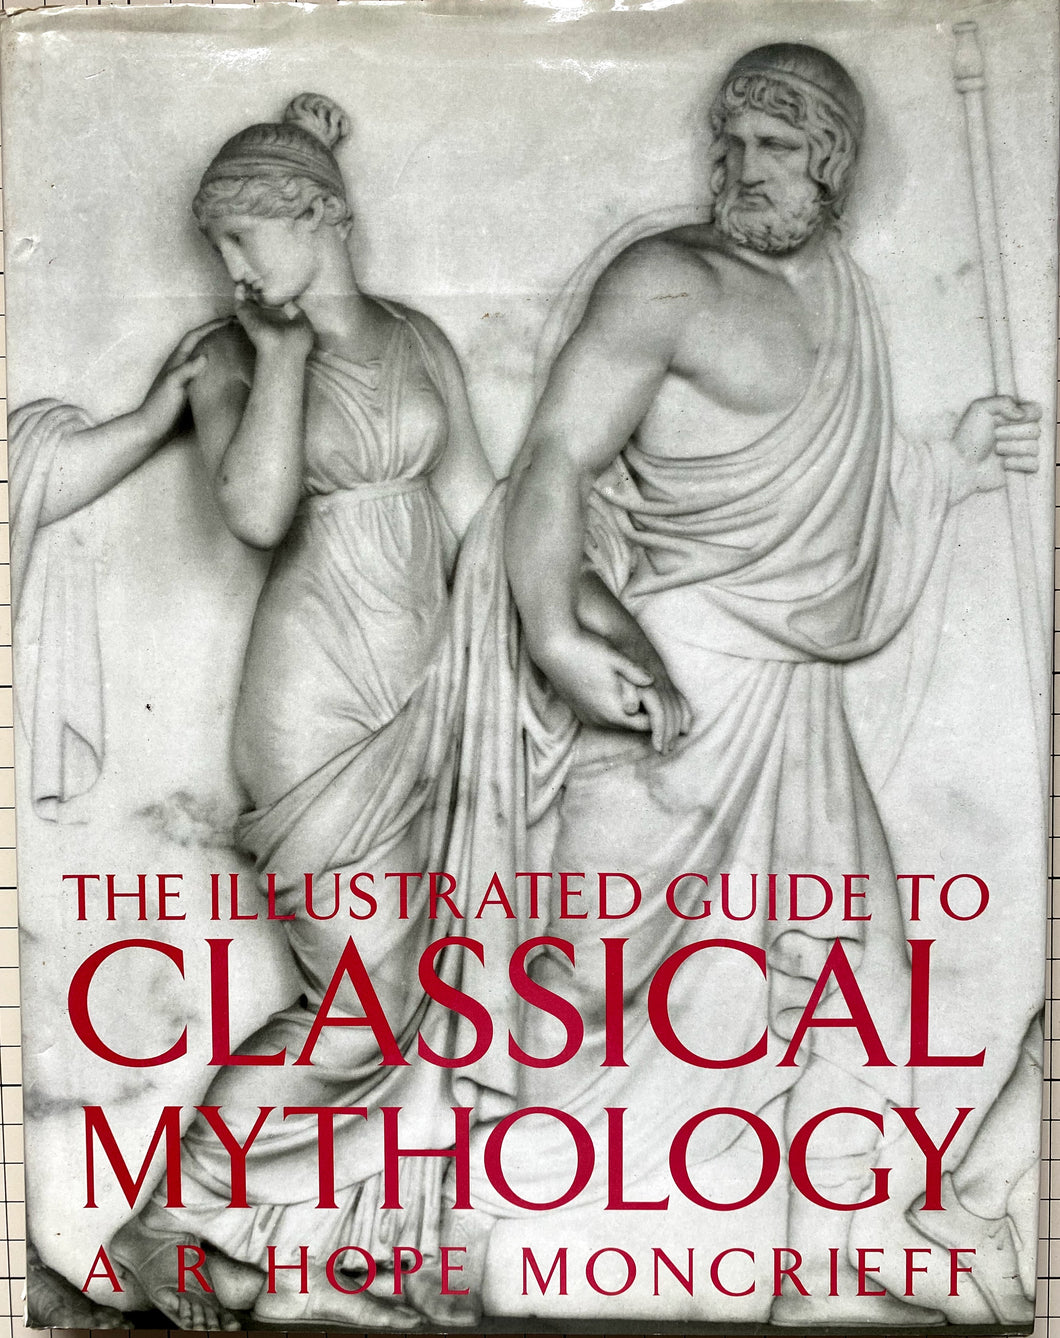 The illustrated guide to classical mythology. : A. R. Hope Moncrieff